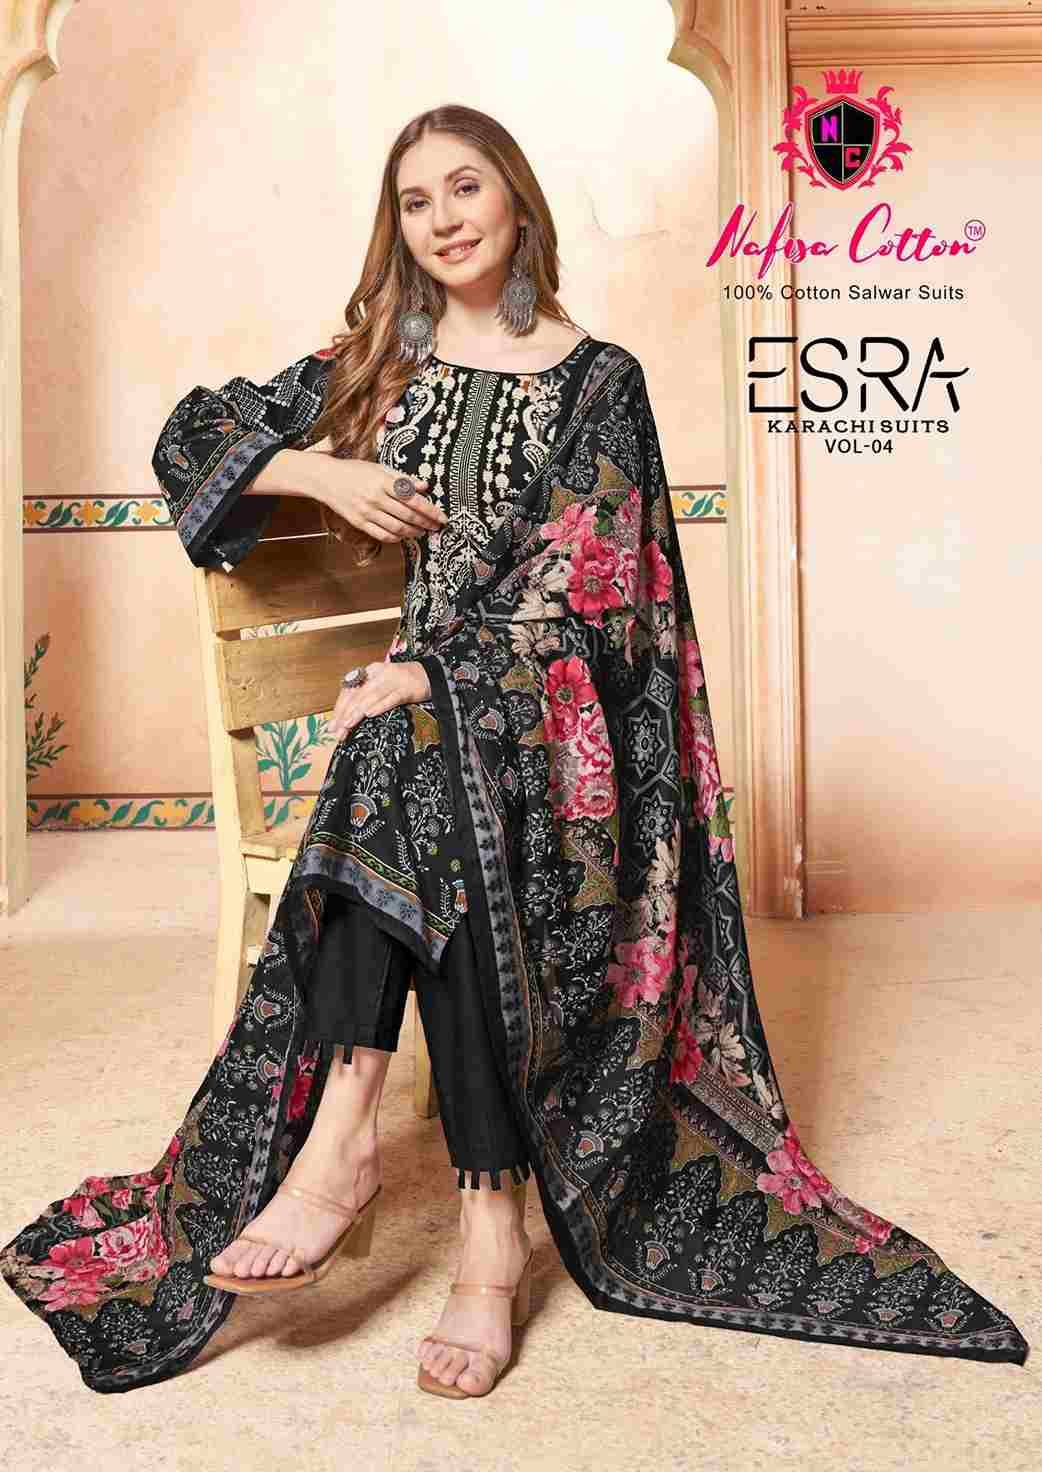 Esra Vol-4 By Nafisa Cotton 4001 To 4006 Series Beautiful Stylish Festive Suits Fancy Colorful Casual Wear & Ethnic Wear & Ready To Wear Pure Cotton Dresses At Wholesale Price